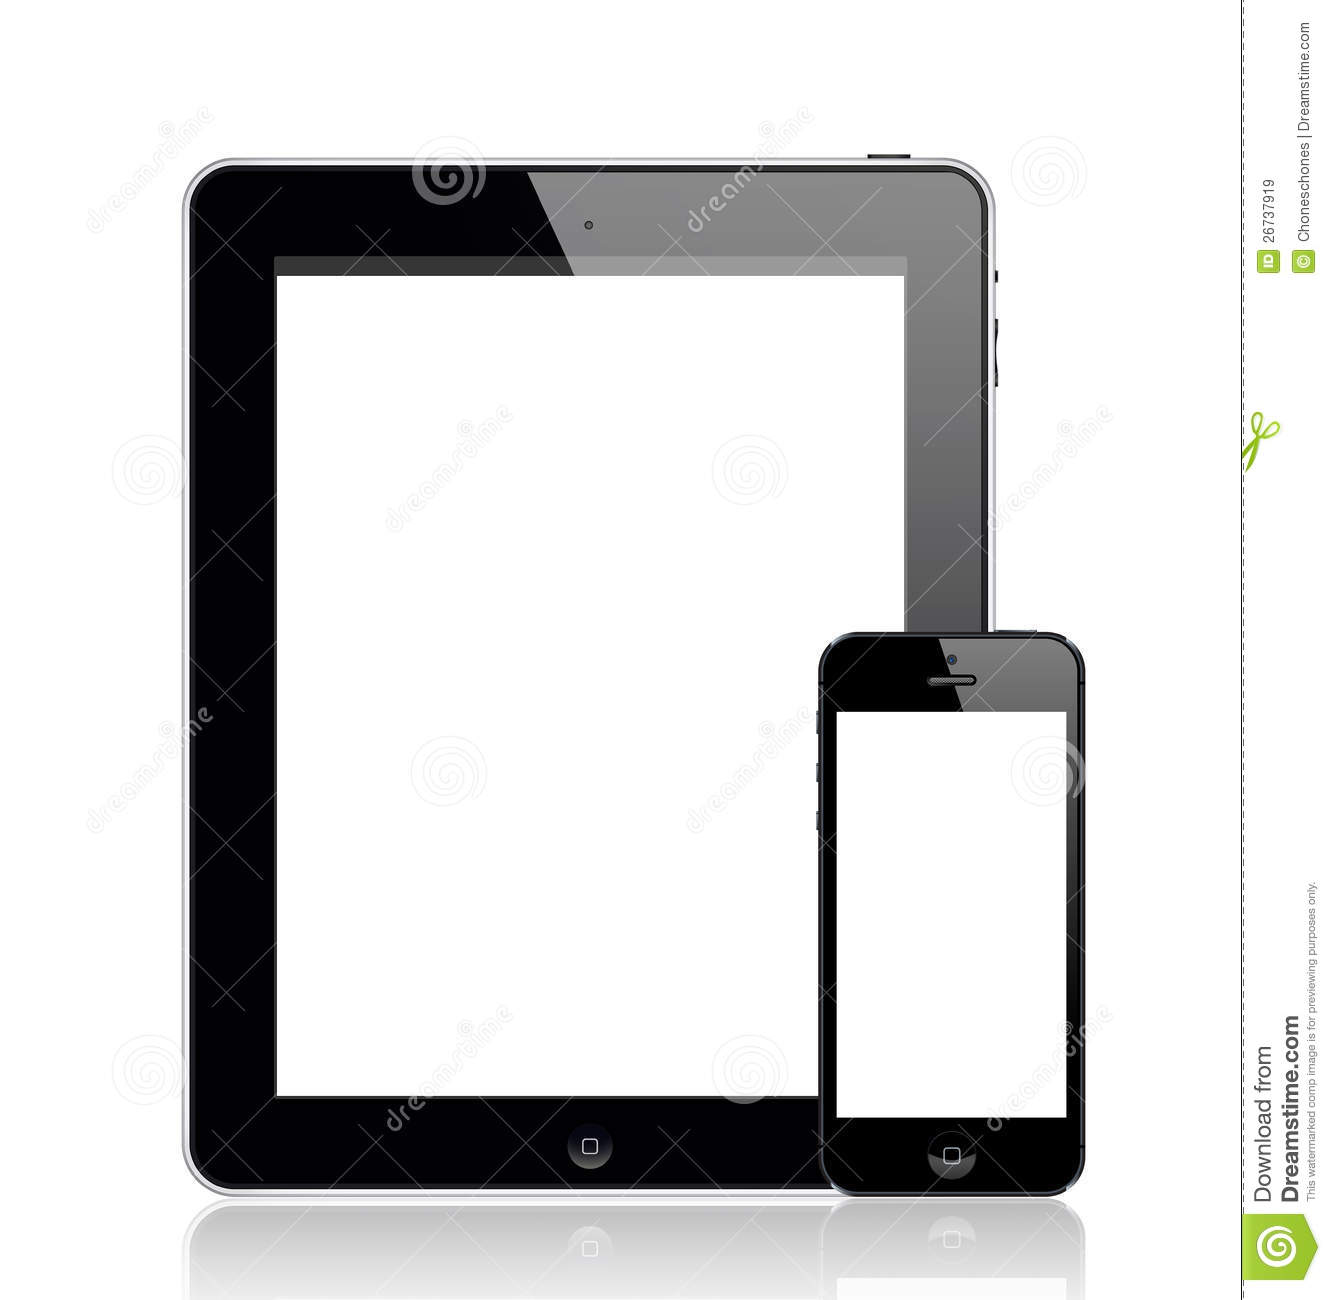 Iphone 5 Clipart Black And White Ipad 3 And Iphone 5 Black